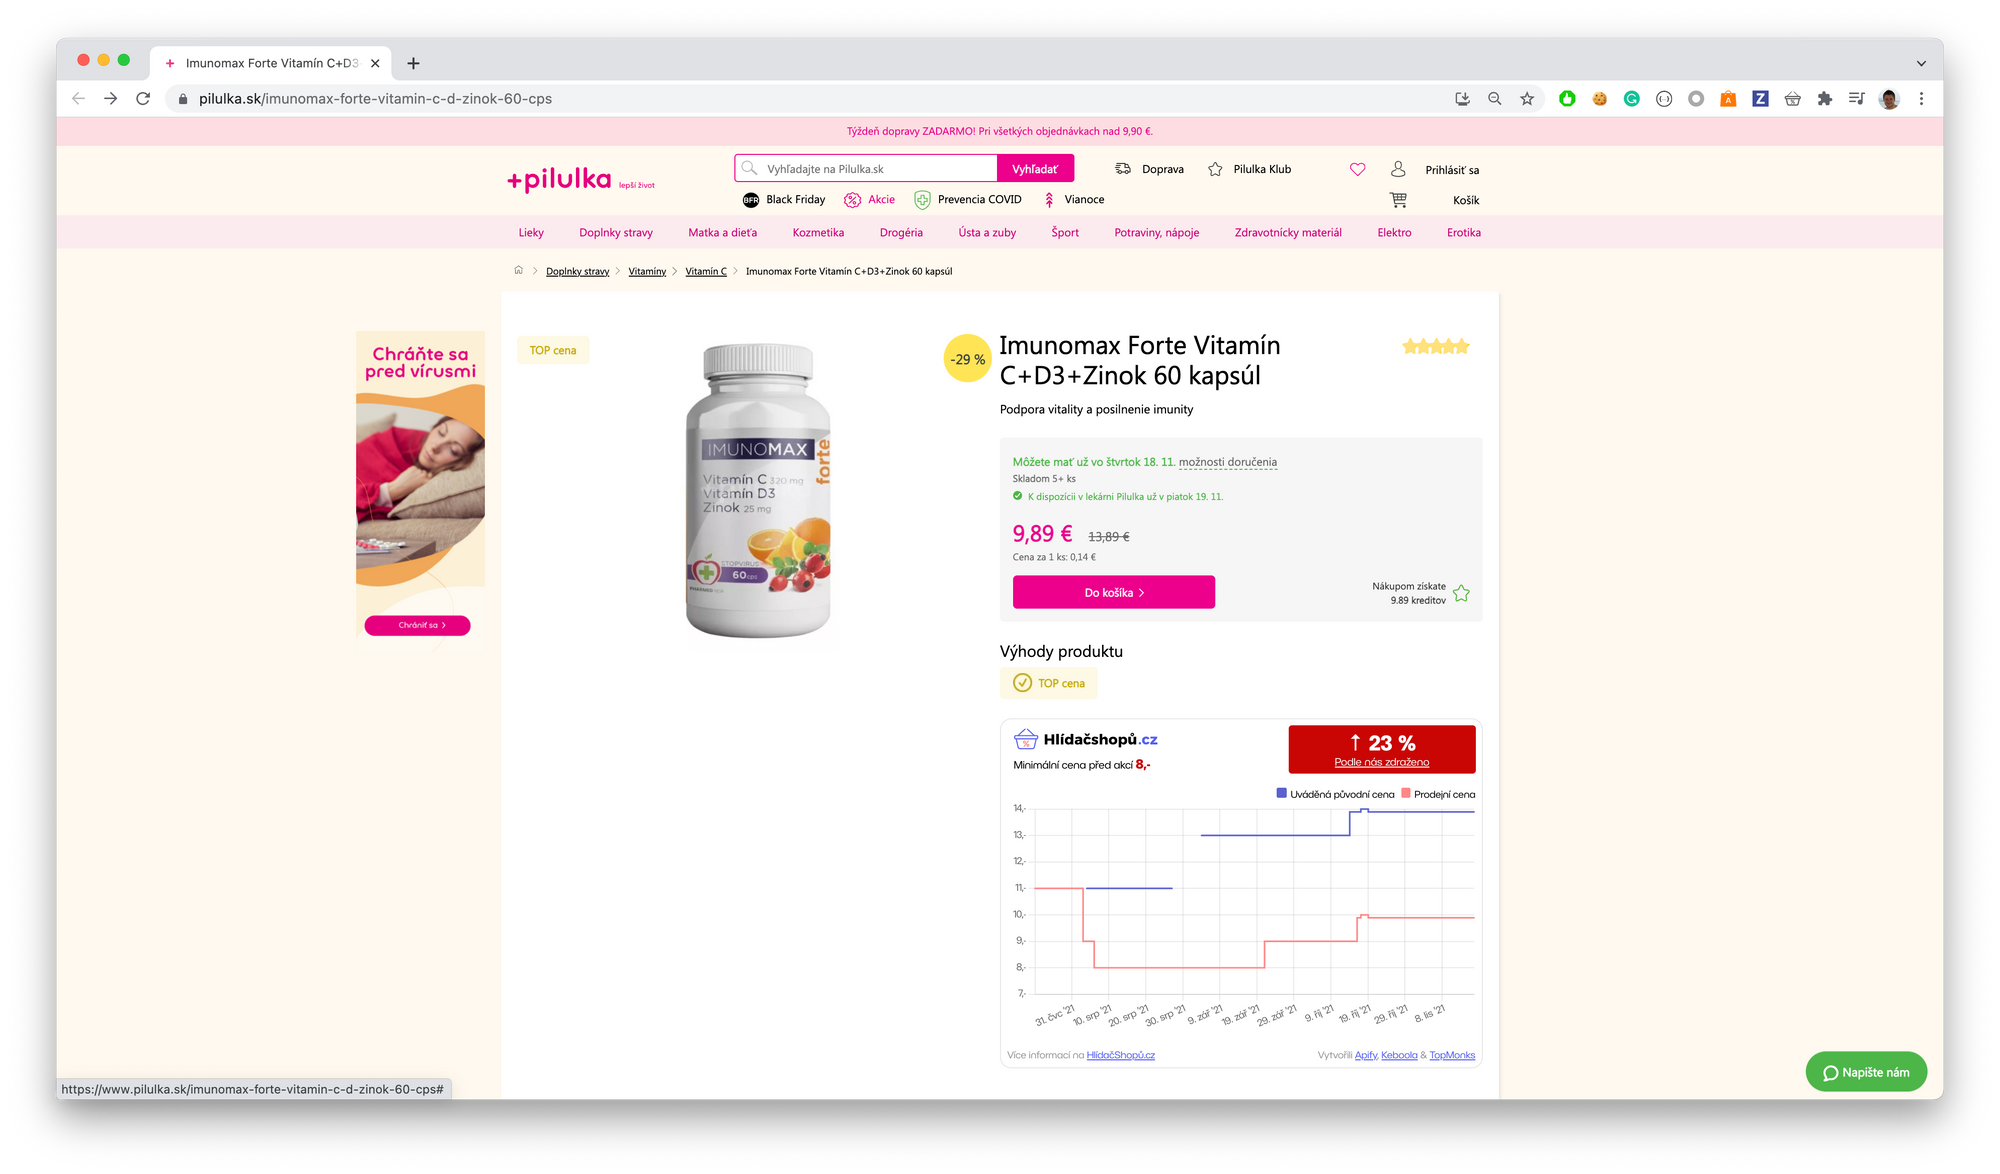 screenshot of vitamins on sale at pilulka.cz from 13,89 € to 9,89 €